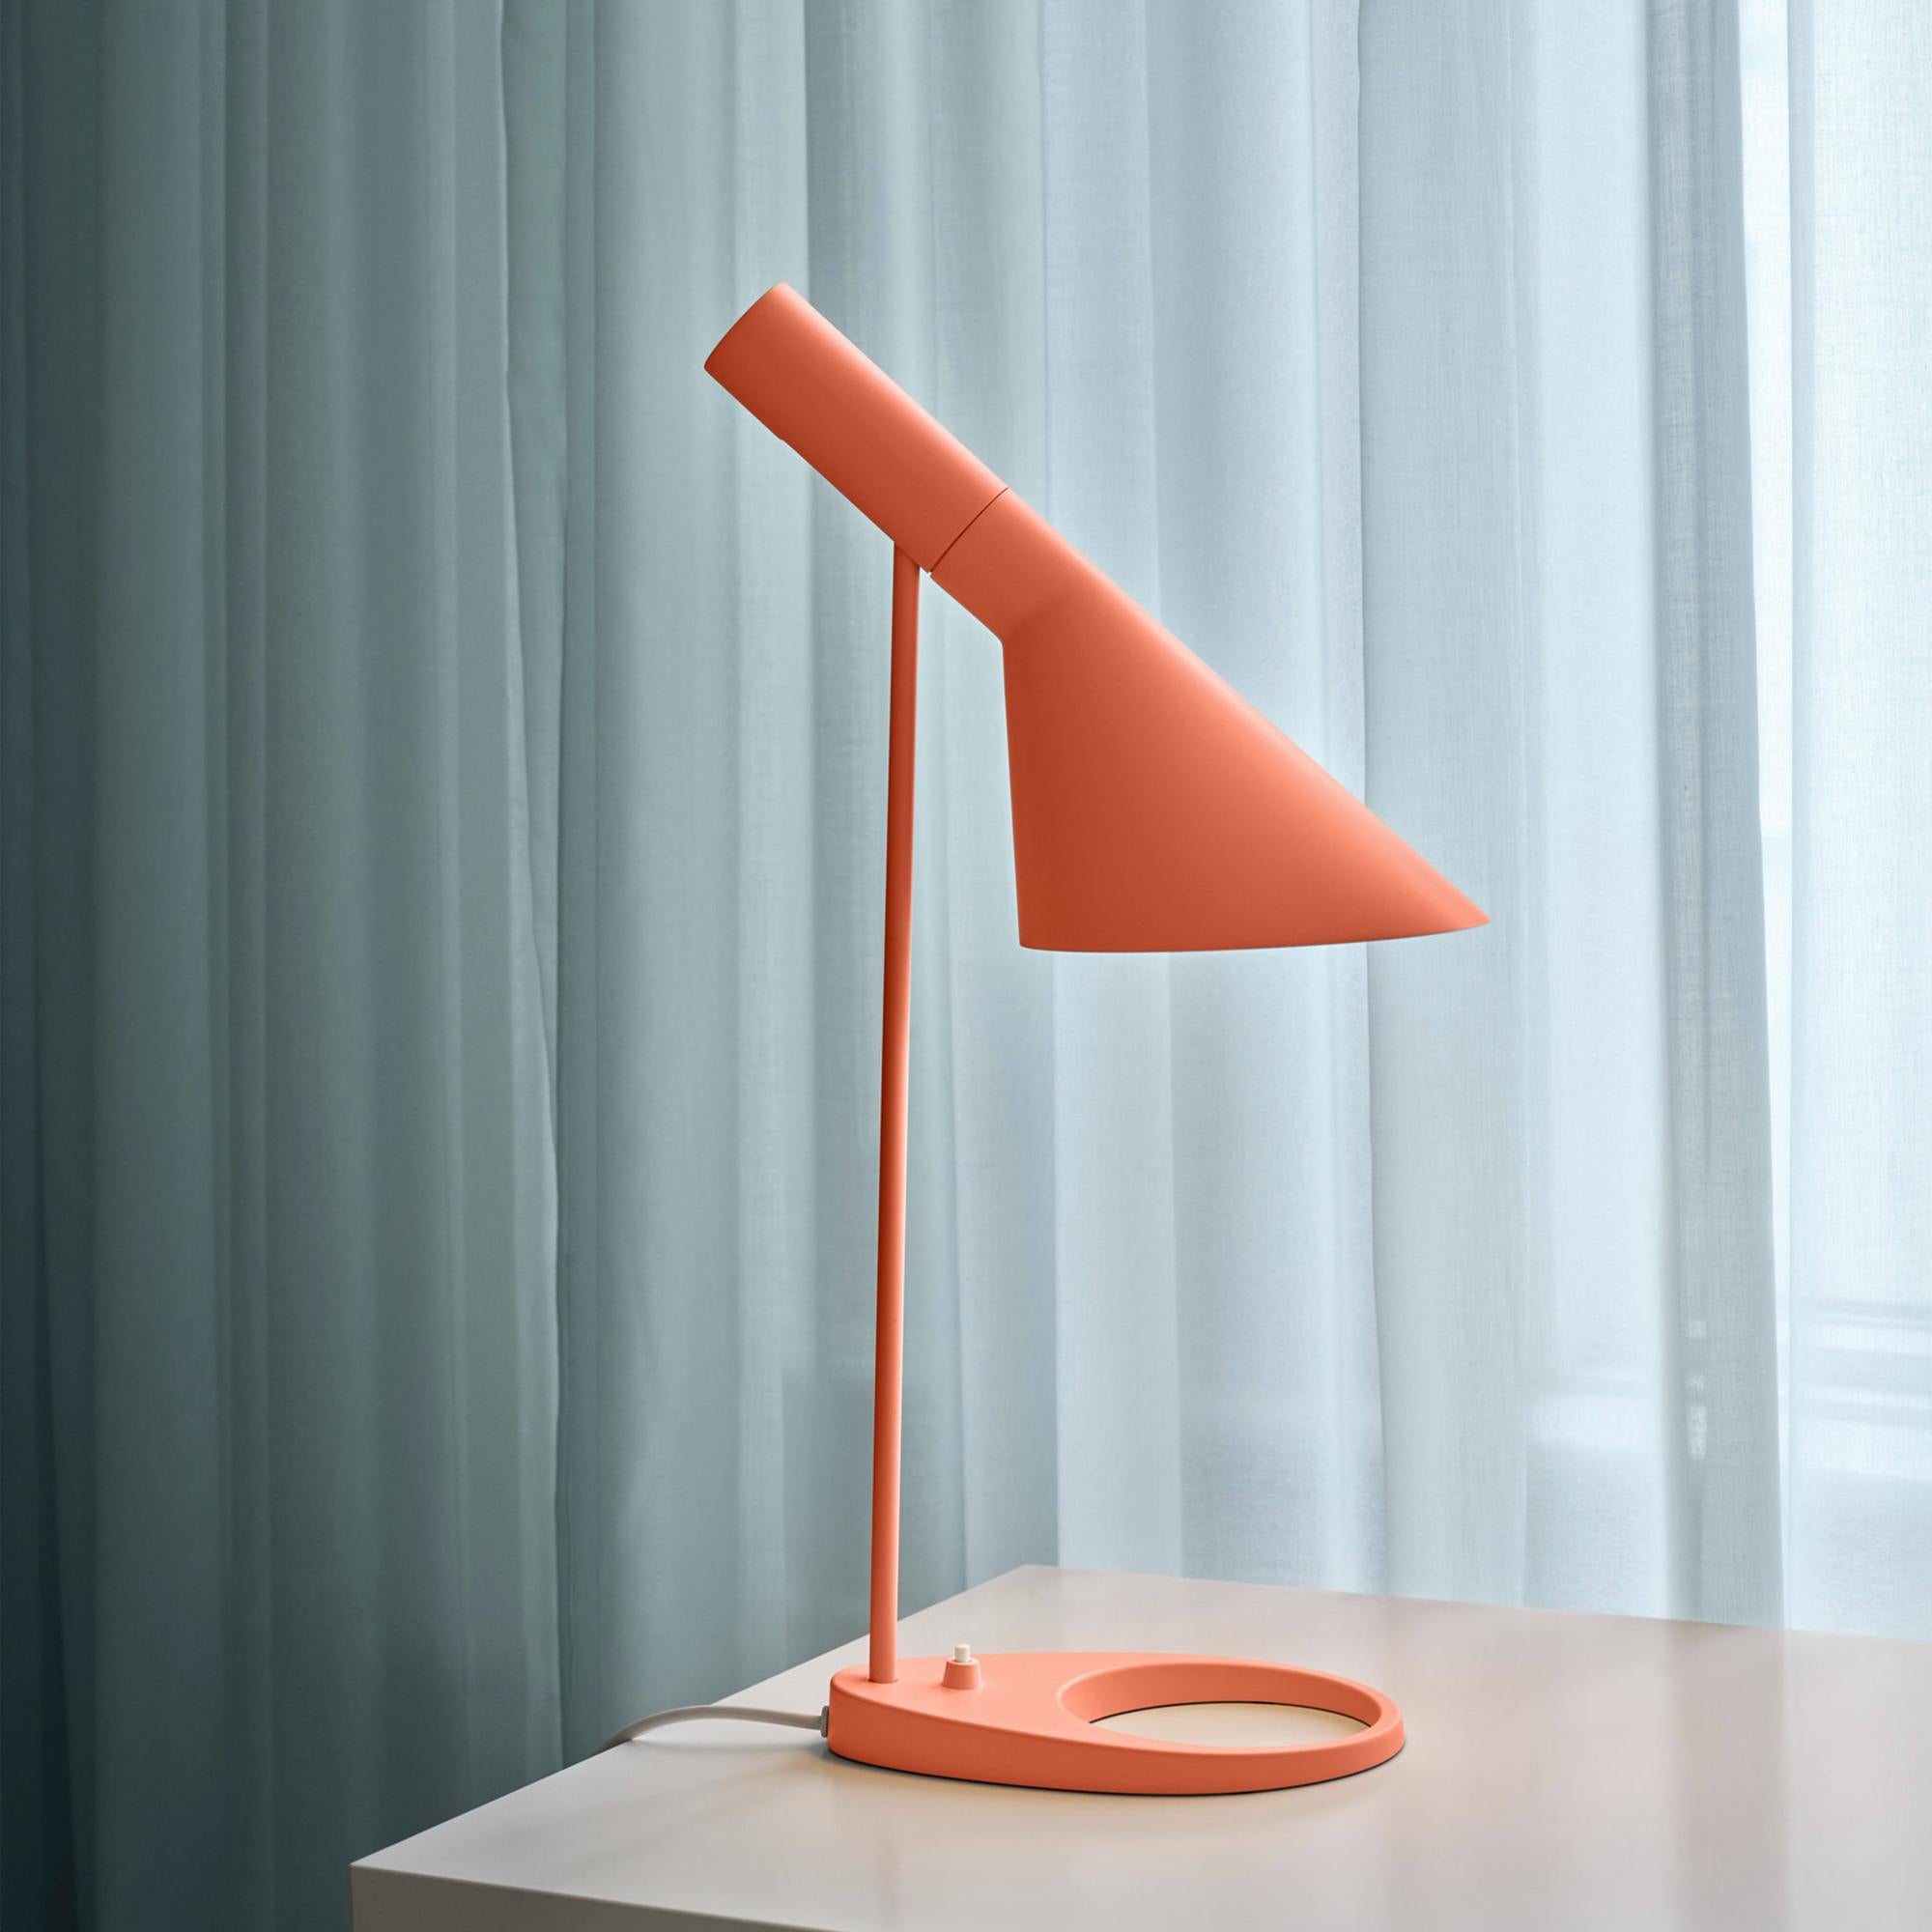 Arne Jacobsen 'AJ Mini' Table Lamp in Electric Orange for Louis Poulsen.


The AJ series was part of the lighting collection renowned Danish designer Arne Jacobsen created for the original SAS Royal Hotel in 1957. Today, his furniture and lighting